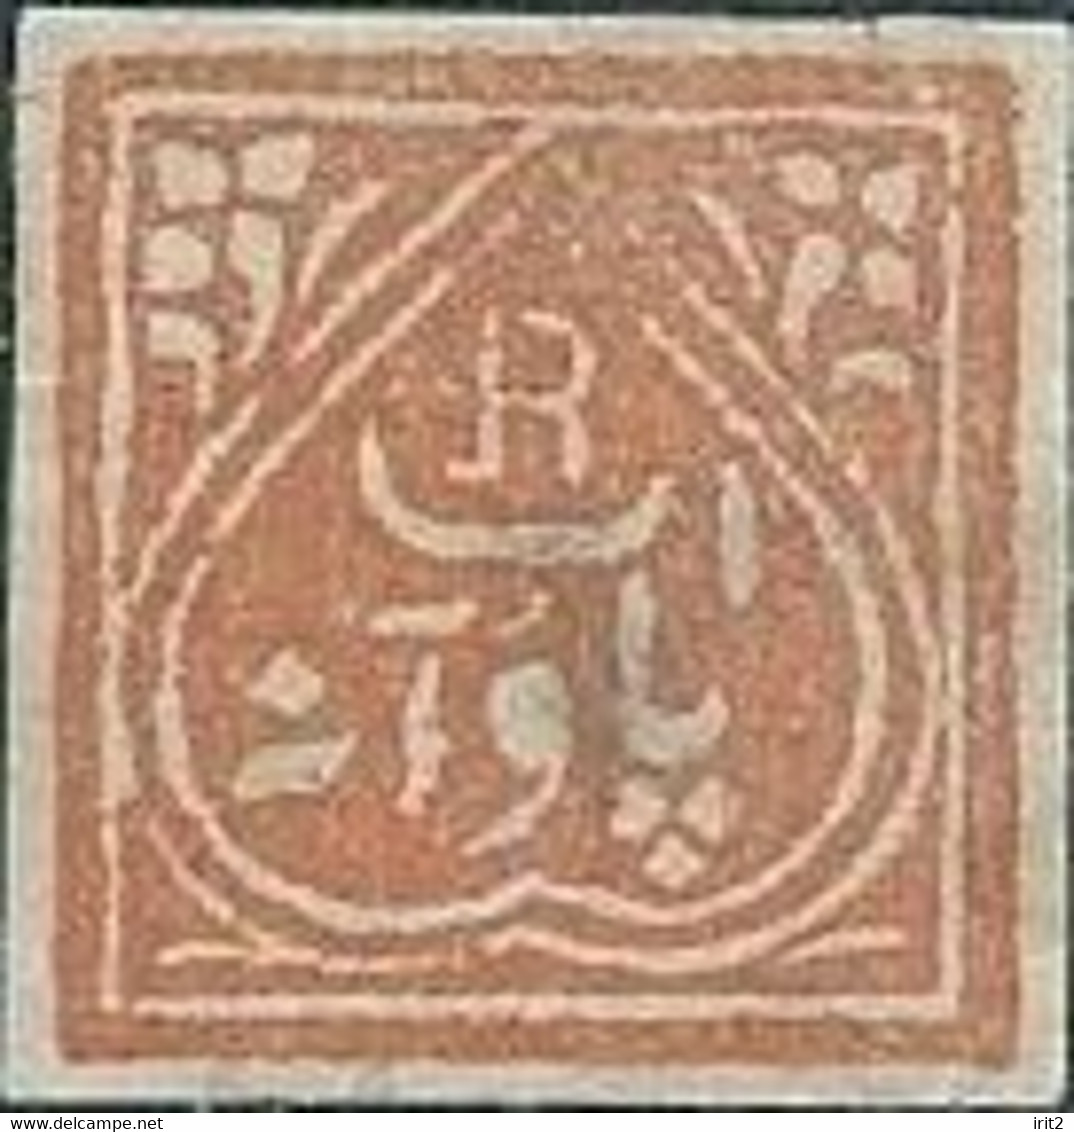 INDIA-INDIAN- INDIEN ESTATES PRINCIPES JIND, Jhind, Rare Stamp Thin Paper,Mint - Jhind